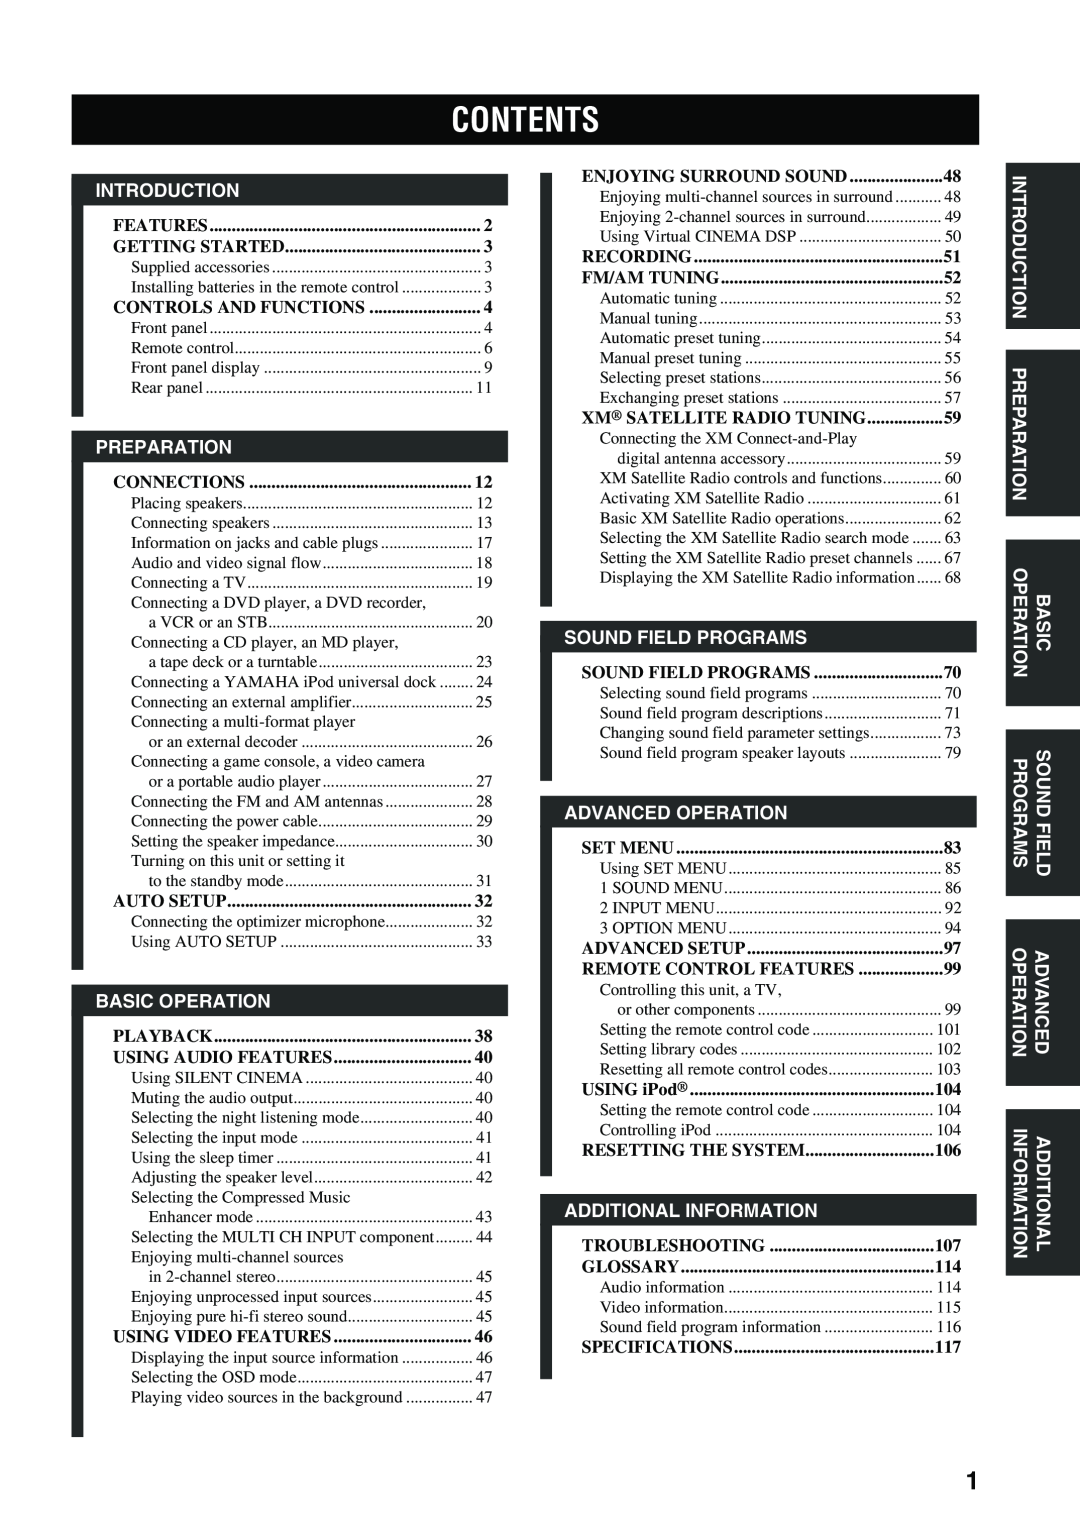 Yamaha HTR-5960 owner manual Contents 